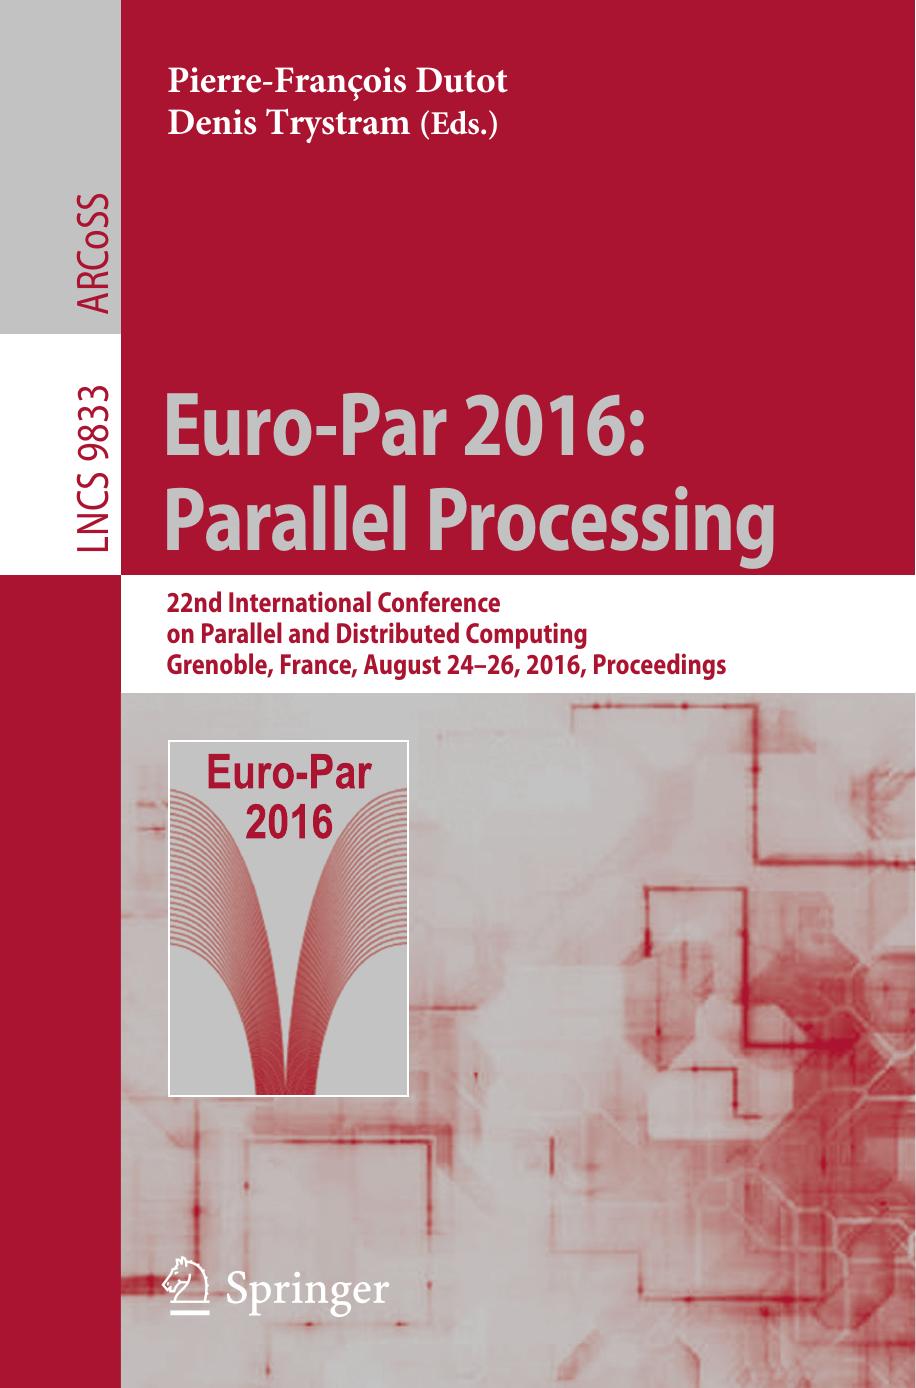 Parallel Processing  22nd International Conference on Parallel and Distributed Computing, 2016